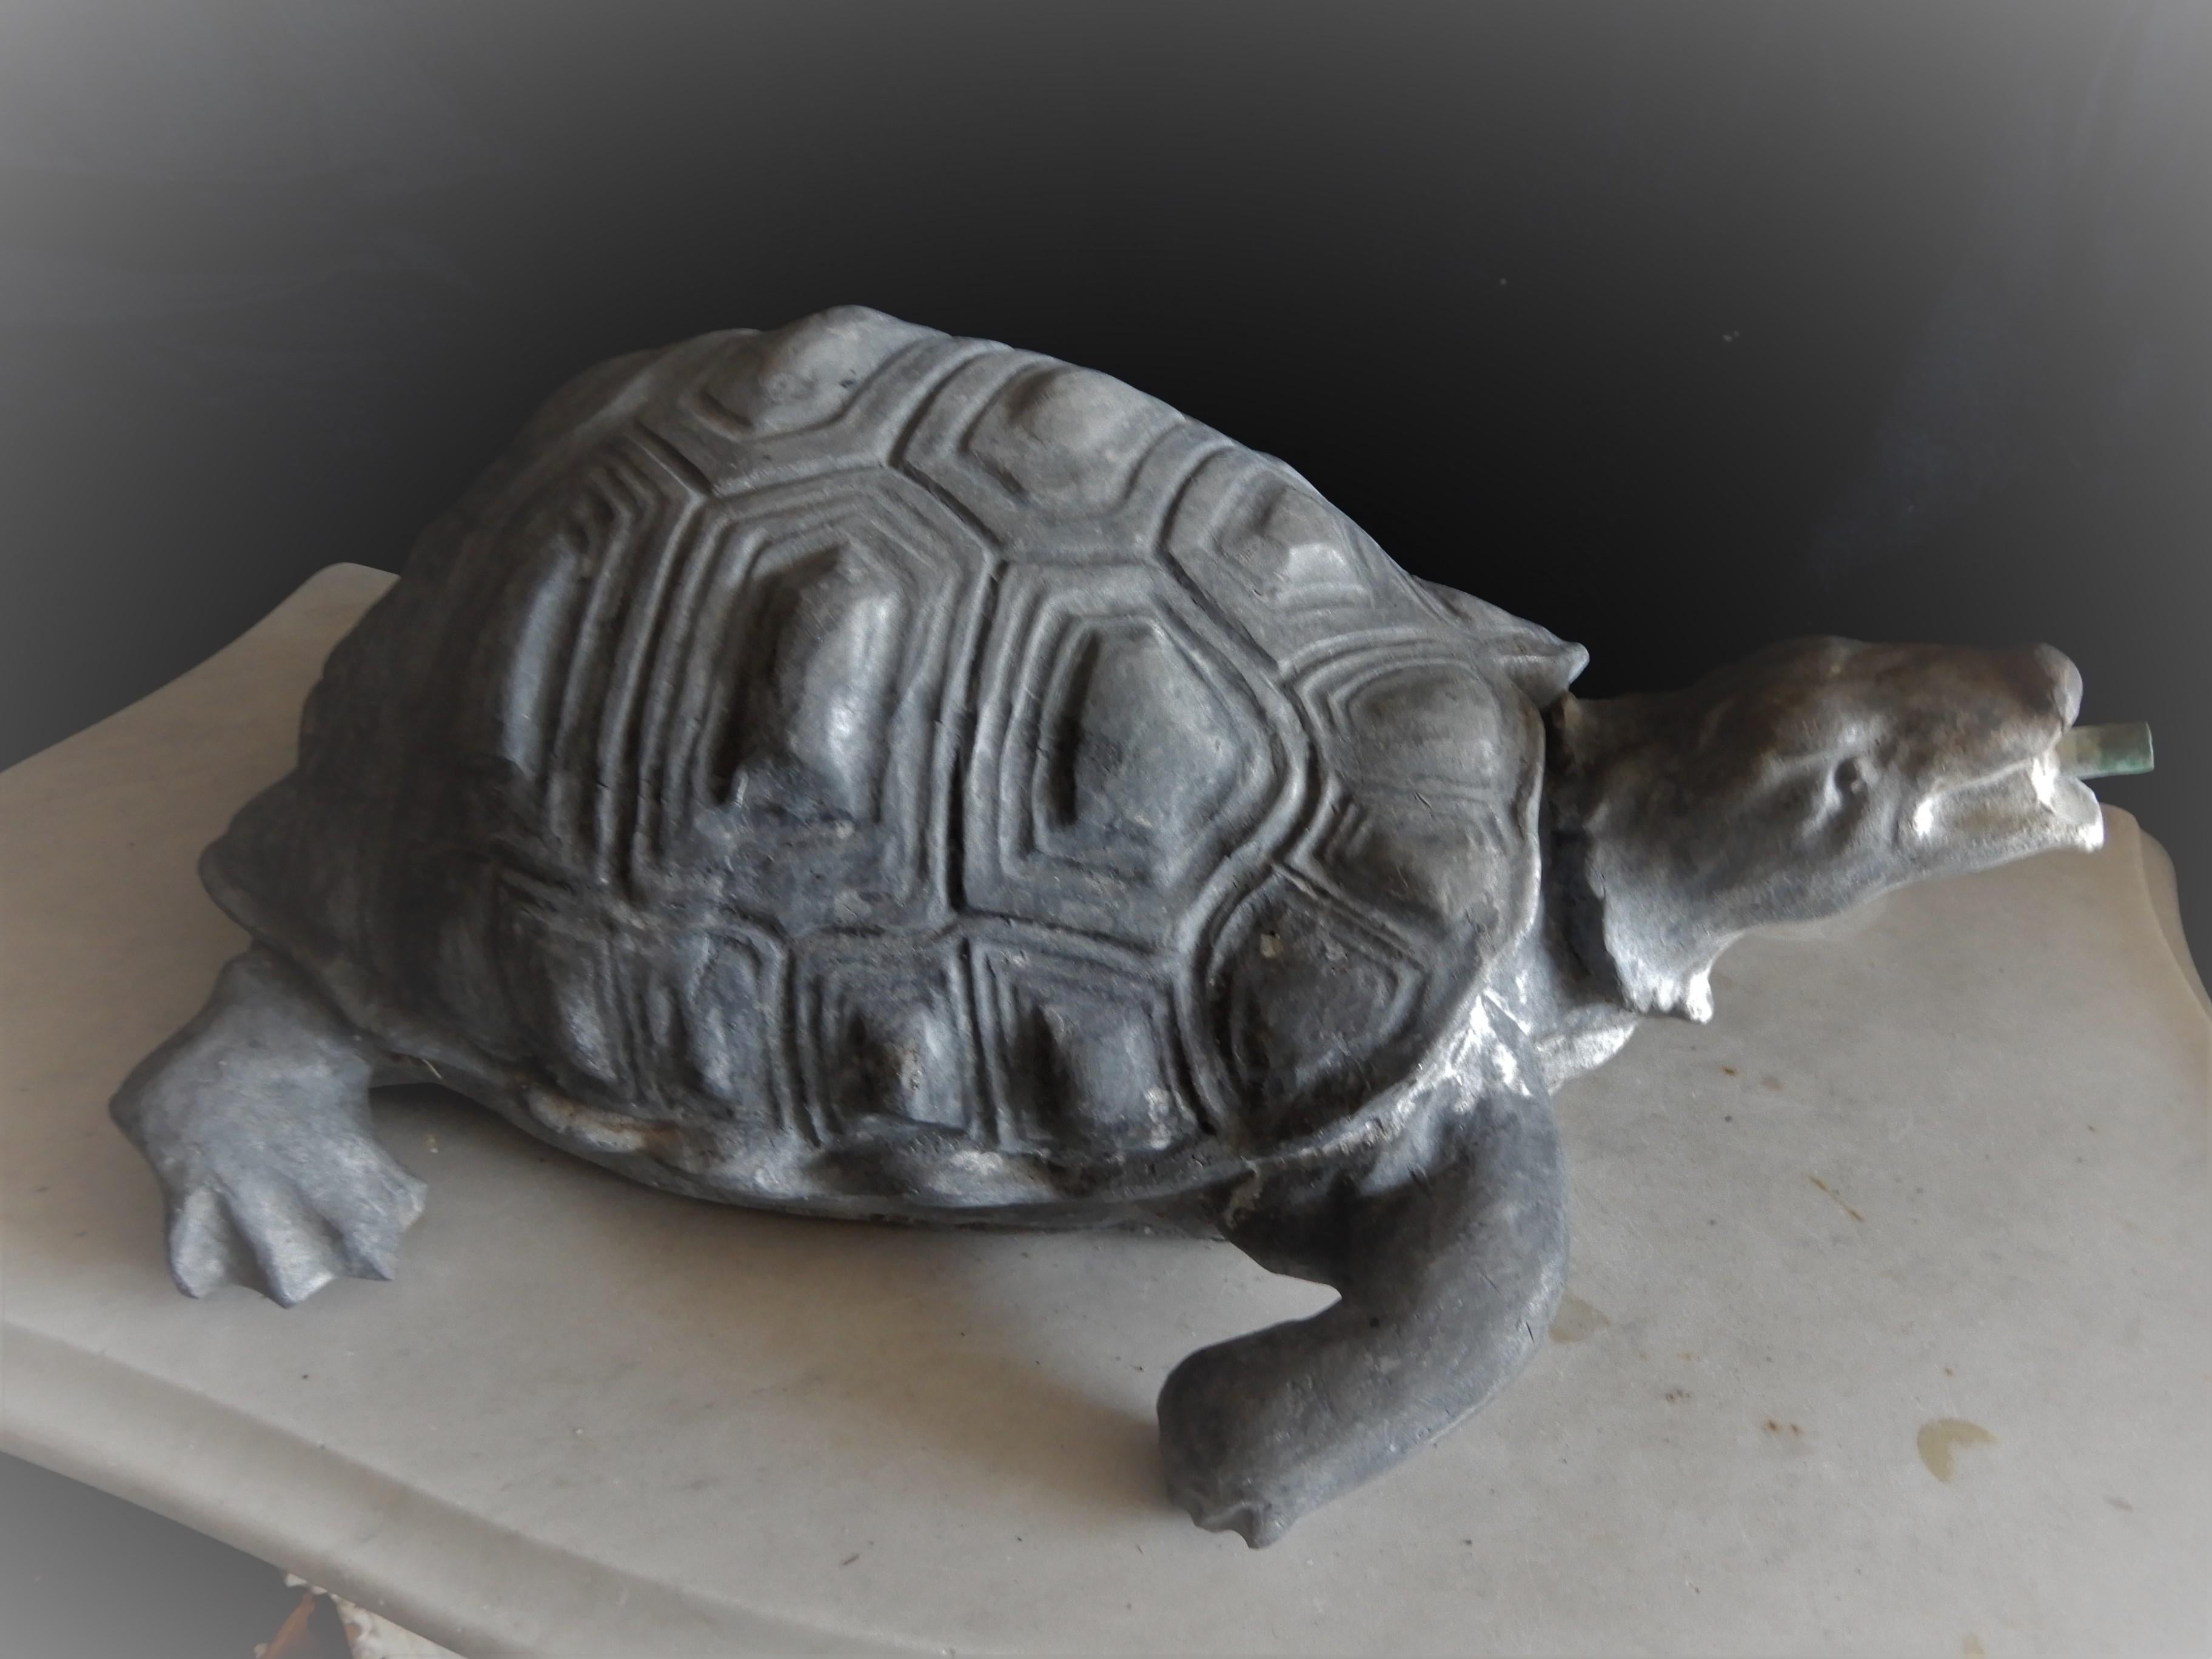 A lead fountain of a turtle by Florentine Craftsman. I have photos from the catalog showing the turtle but they were too small to post to this website. The turtle was purchased from a landscaper/collector who went to Florentine Craftsman in NYC to